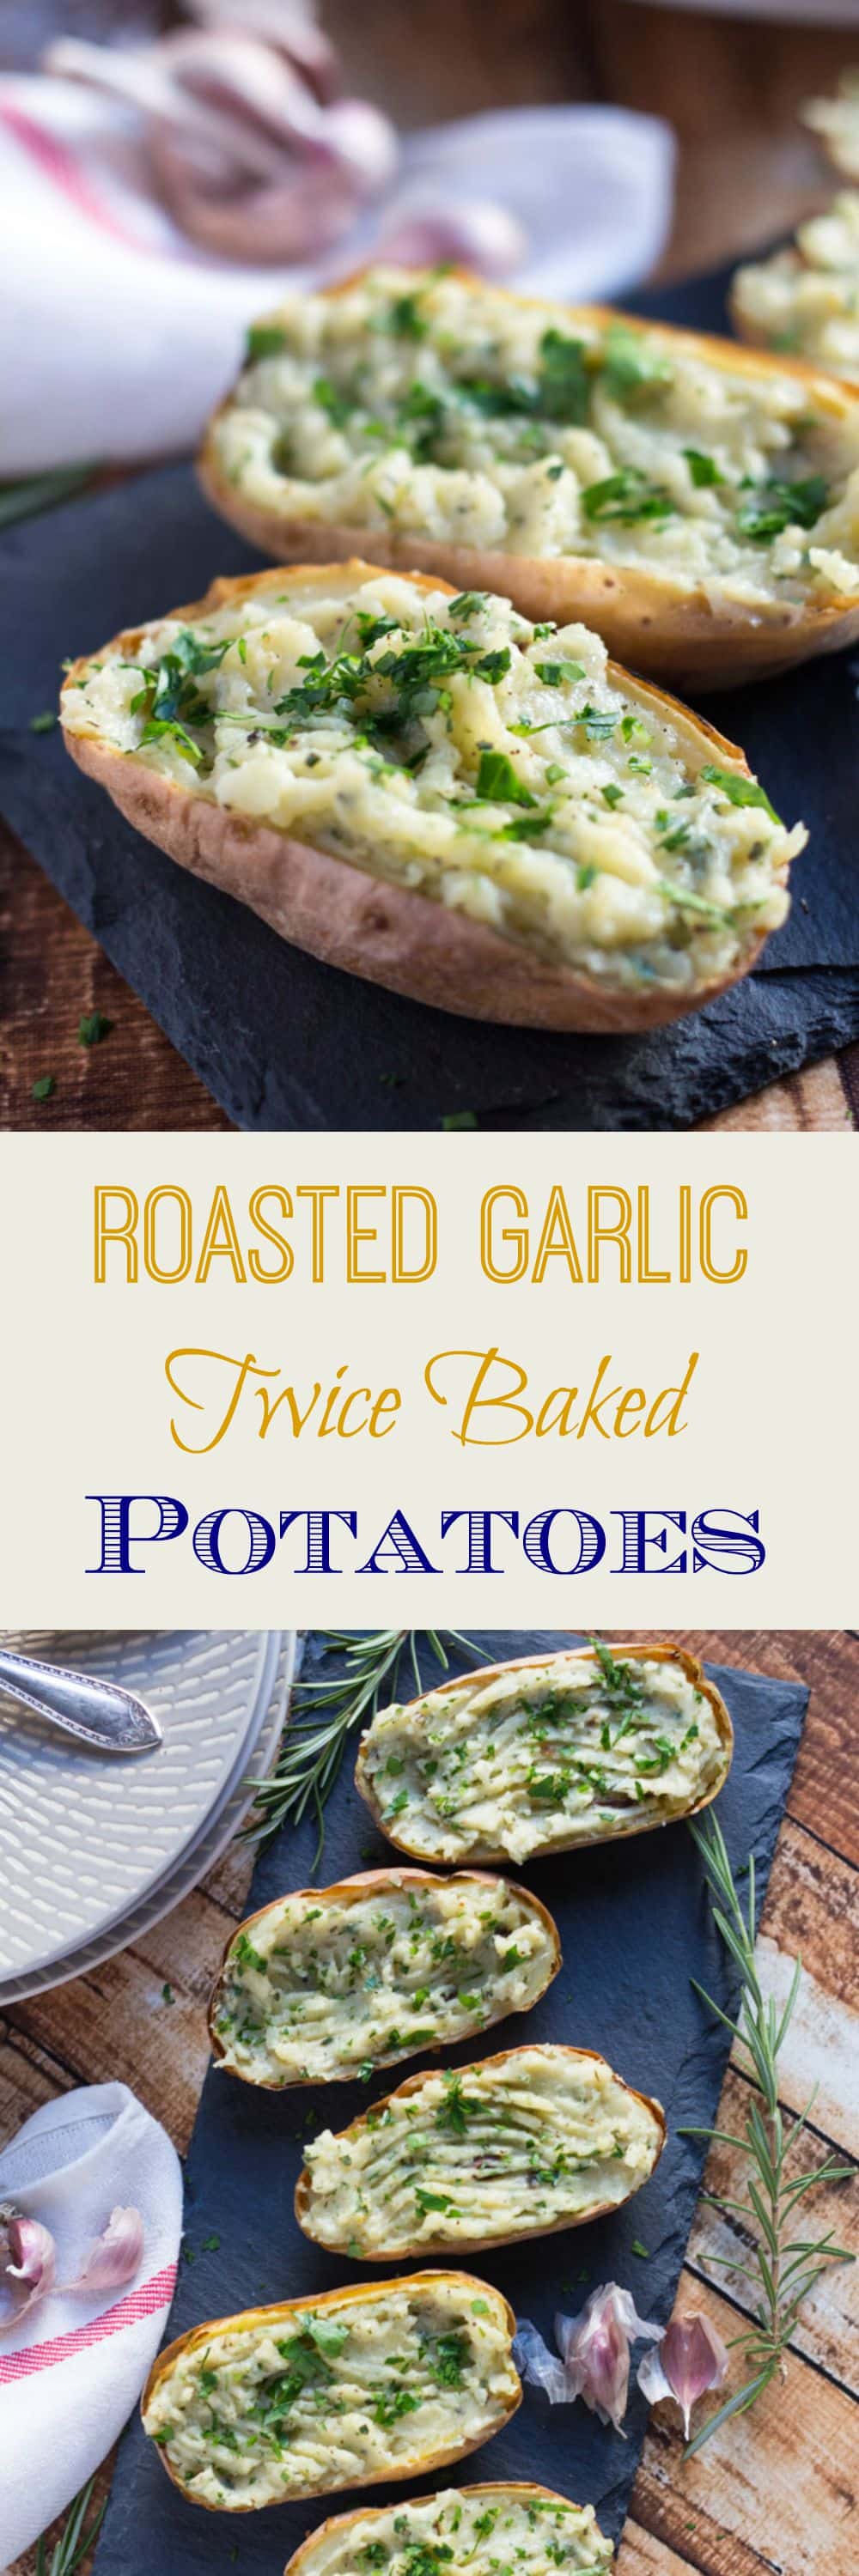 These Roasted Garlic Twice Baked Potatoes are full of creamy, roasted garlic, and can easily be frozen so you always have a quick side dish on hand.